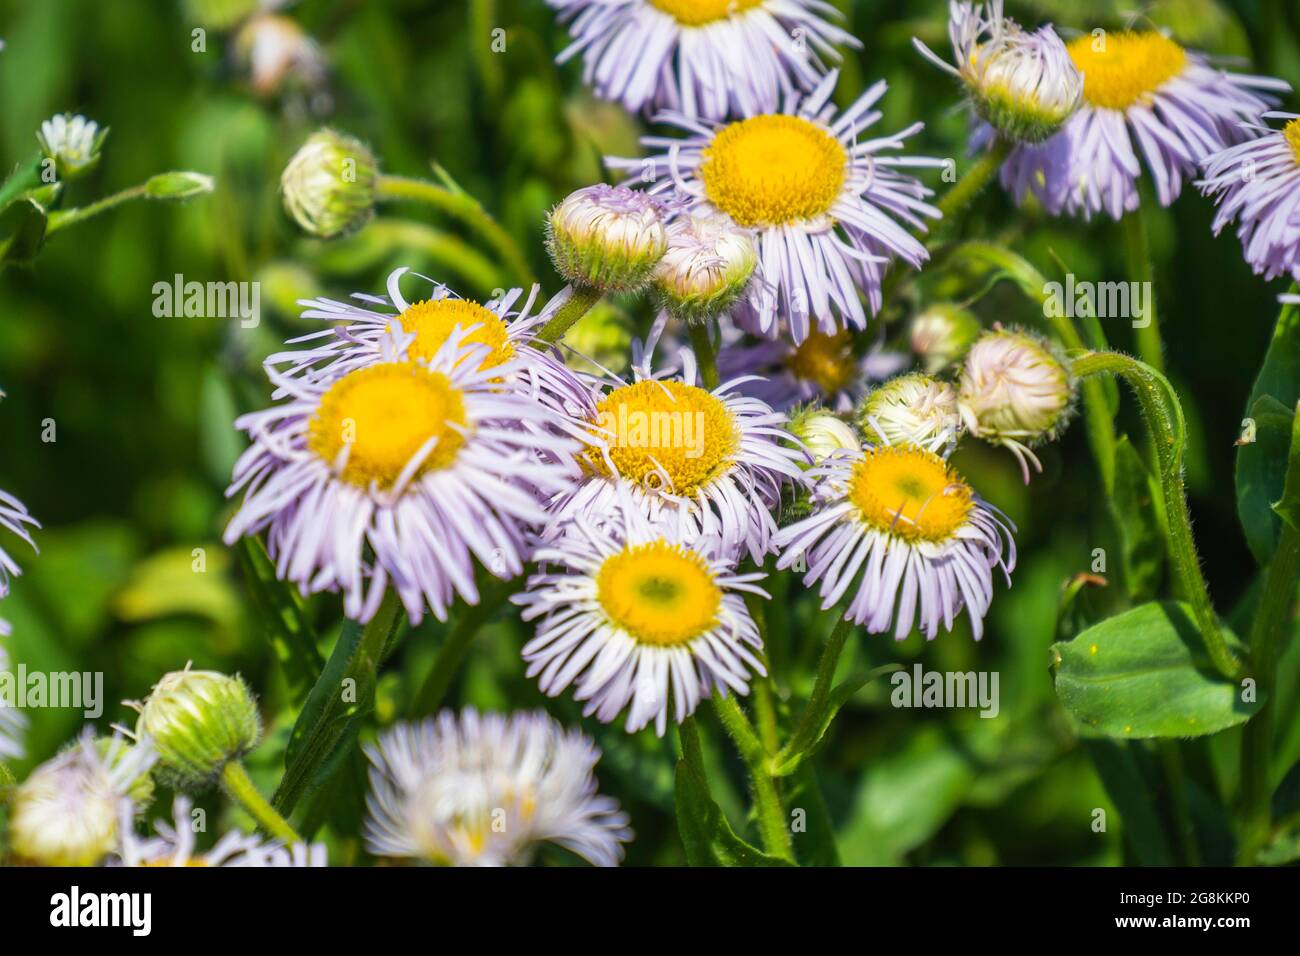 Erigeron Flowers in the Garden at Sunny Summer Day Stock Photo